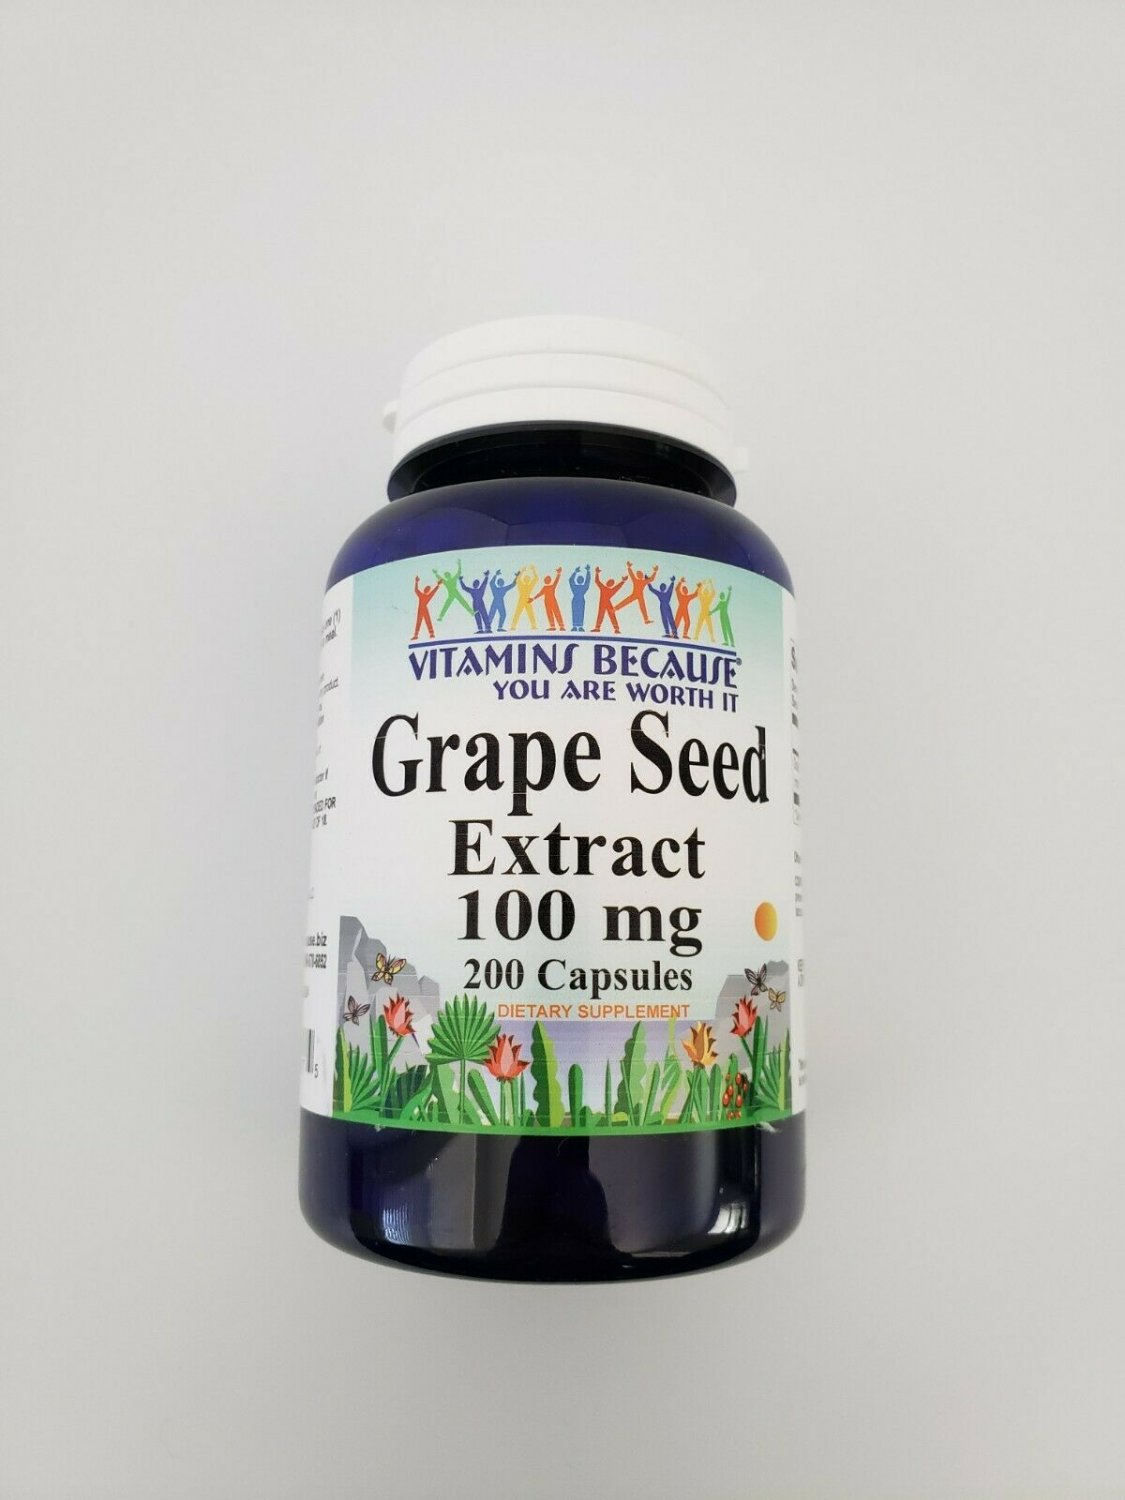 Vitamins Because Grapeseed Extract 100 mg 200 Capsules